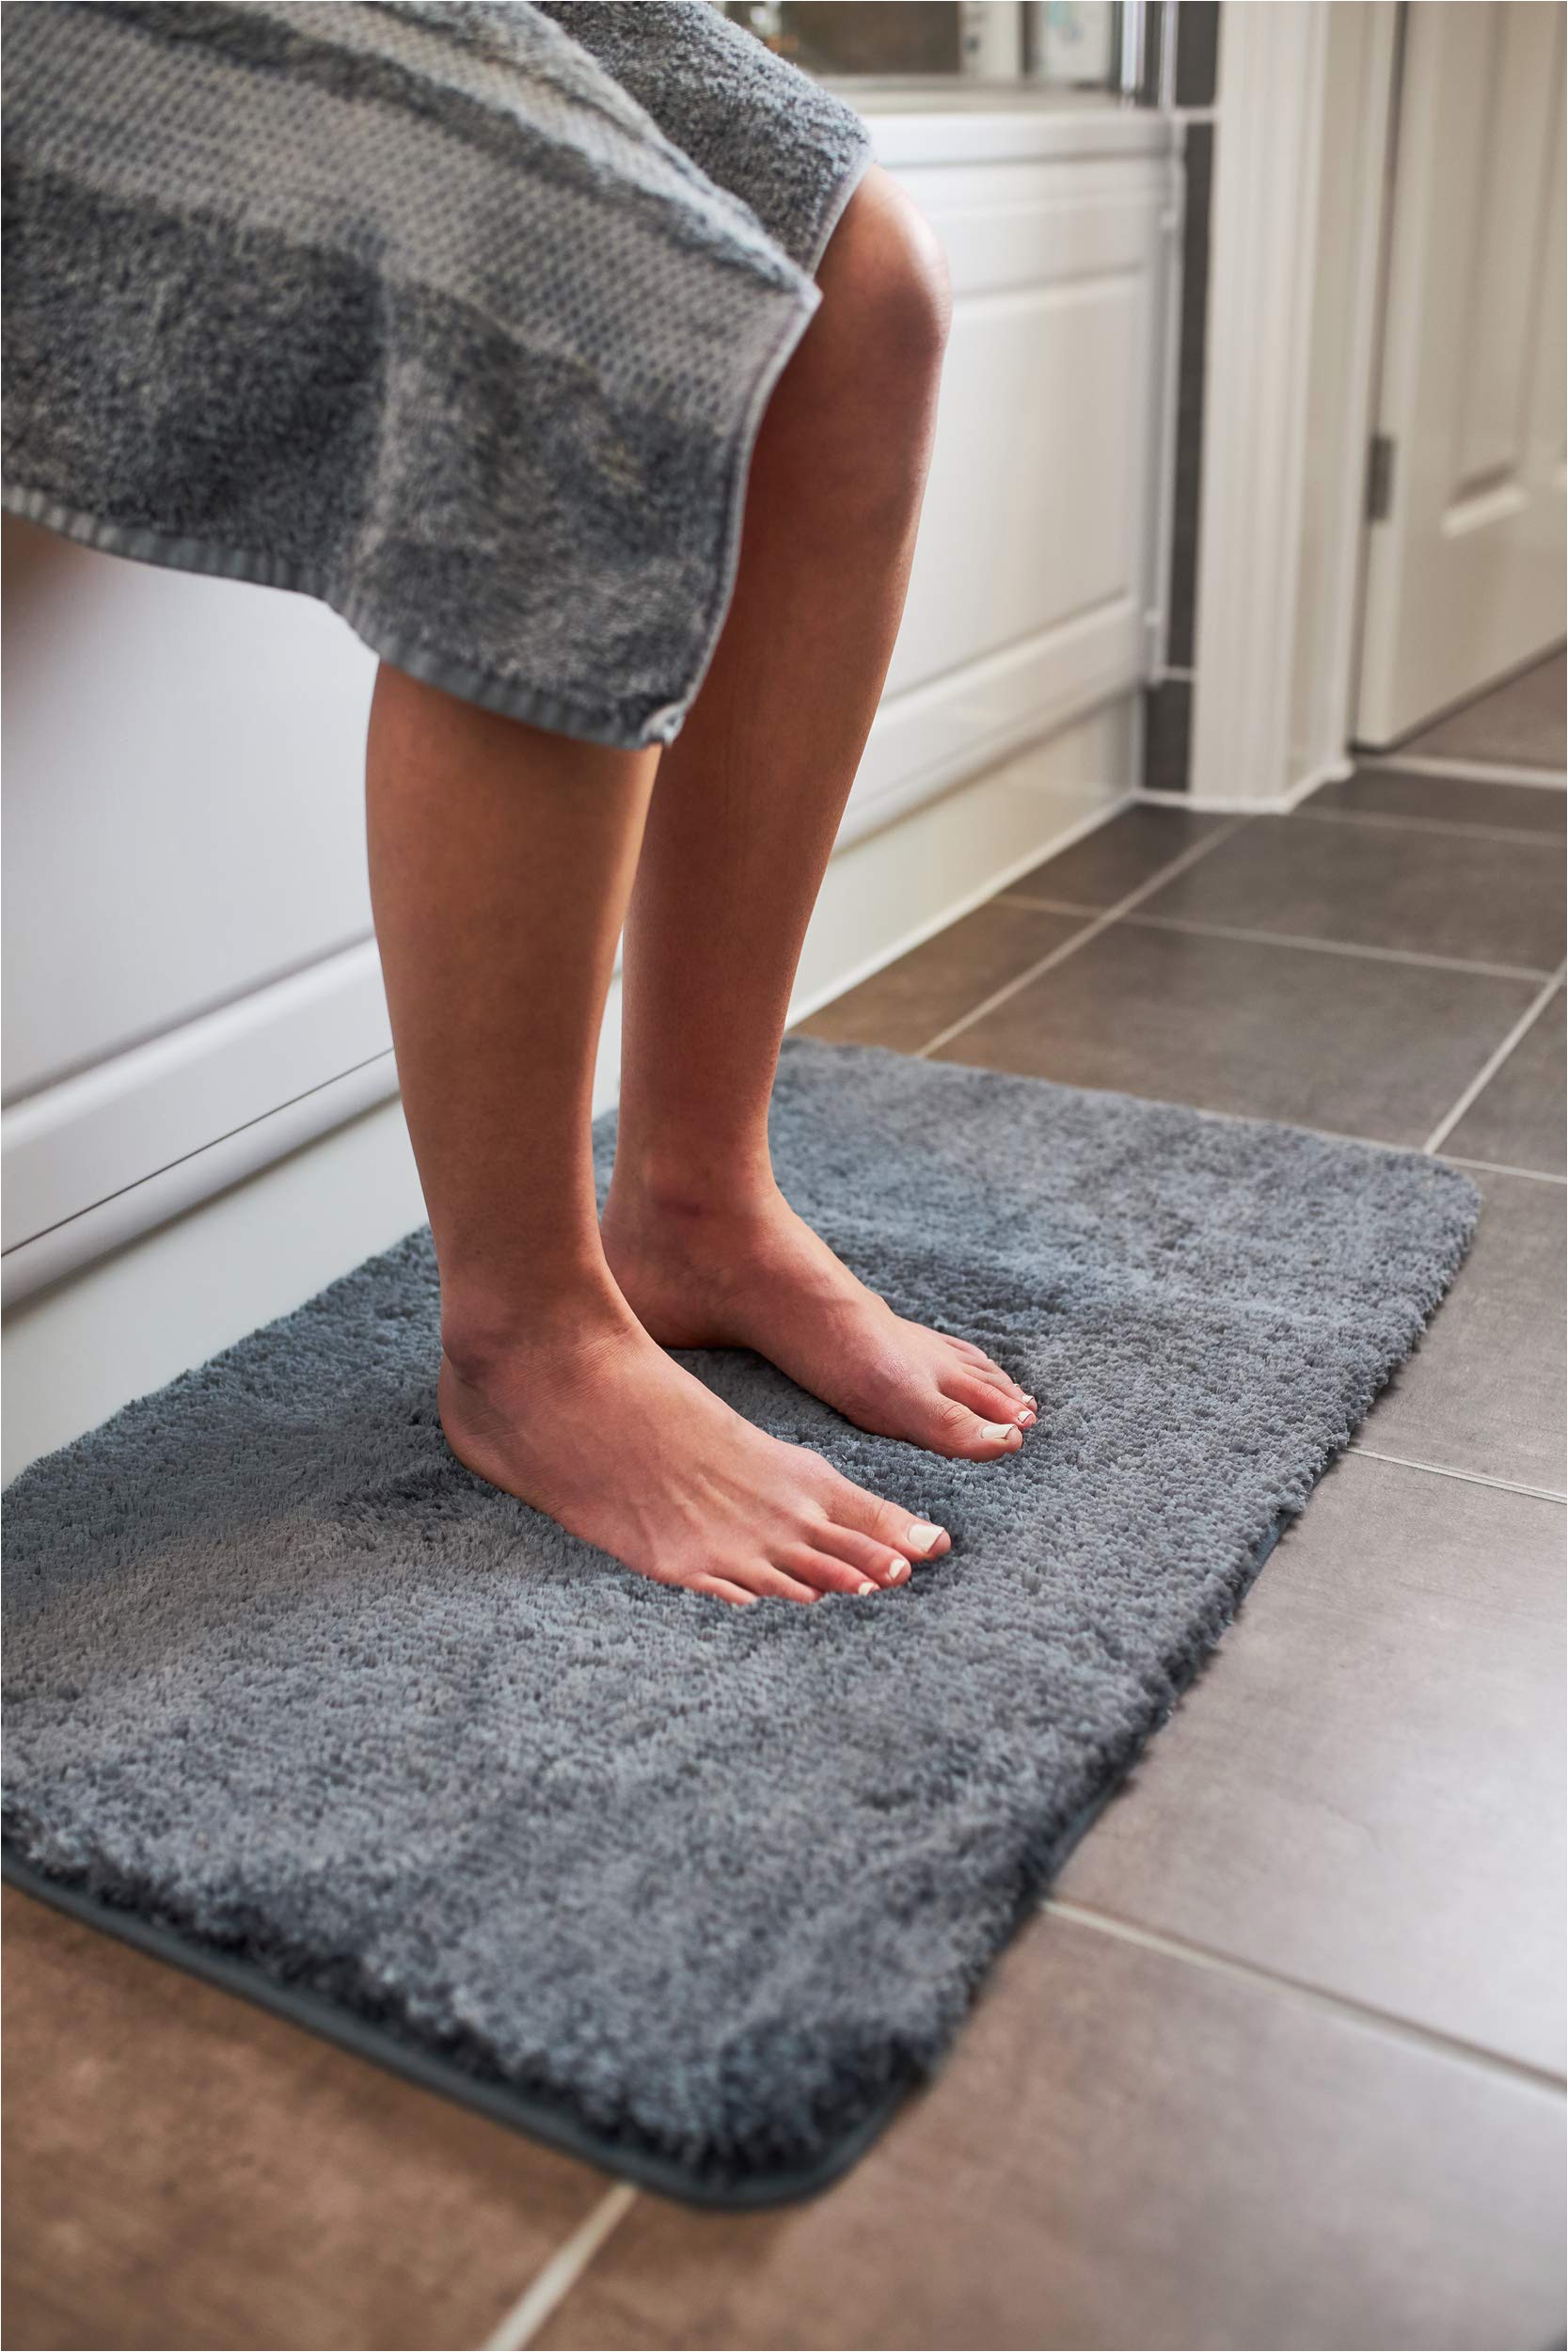 Charcoal Gray Bathroom Rugs Luxury Grey Bath Mat Microfiber Non Slip Bath Rug with Super soft Absorbent Dry Fast Design for Bath and Shower